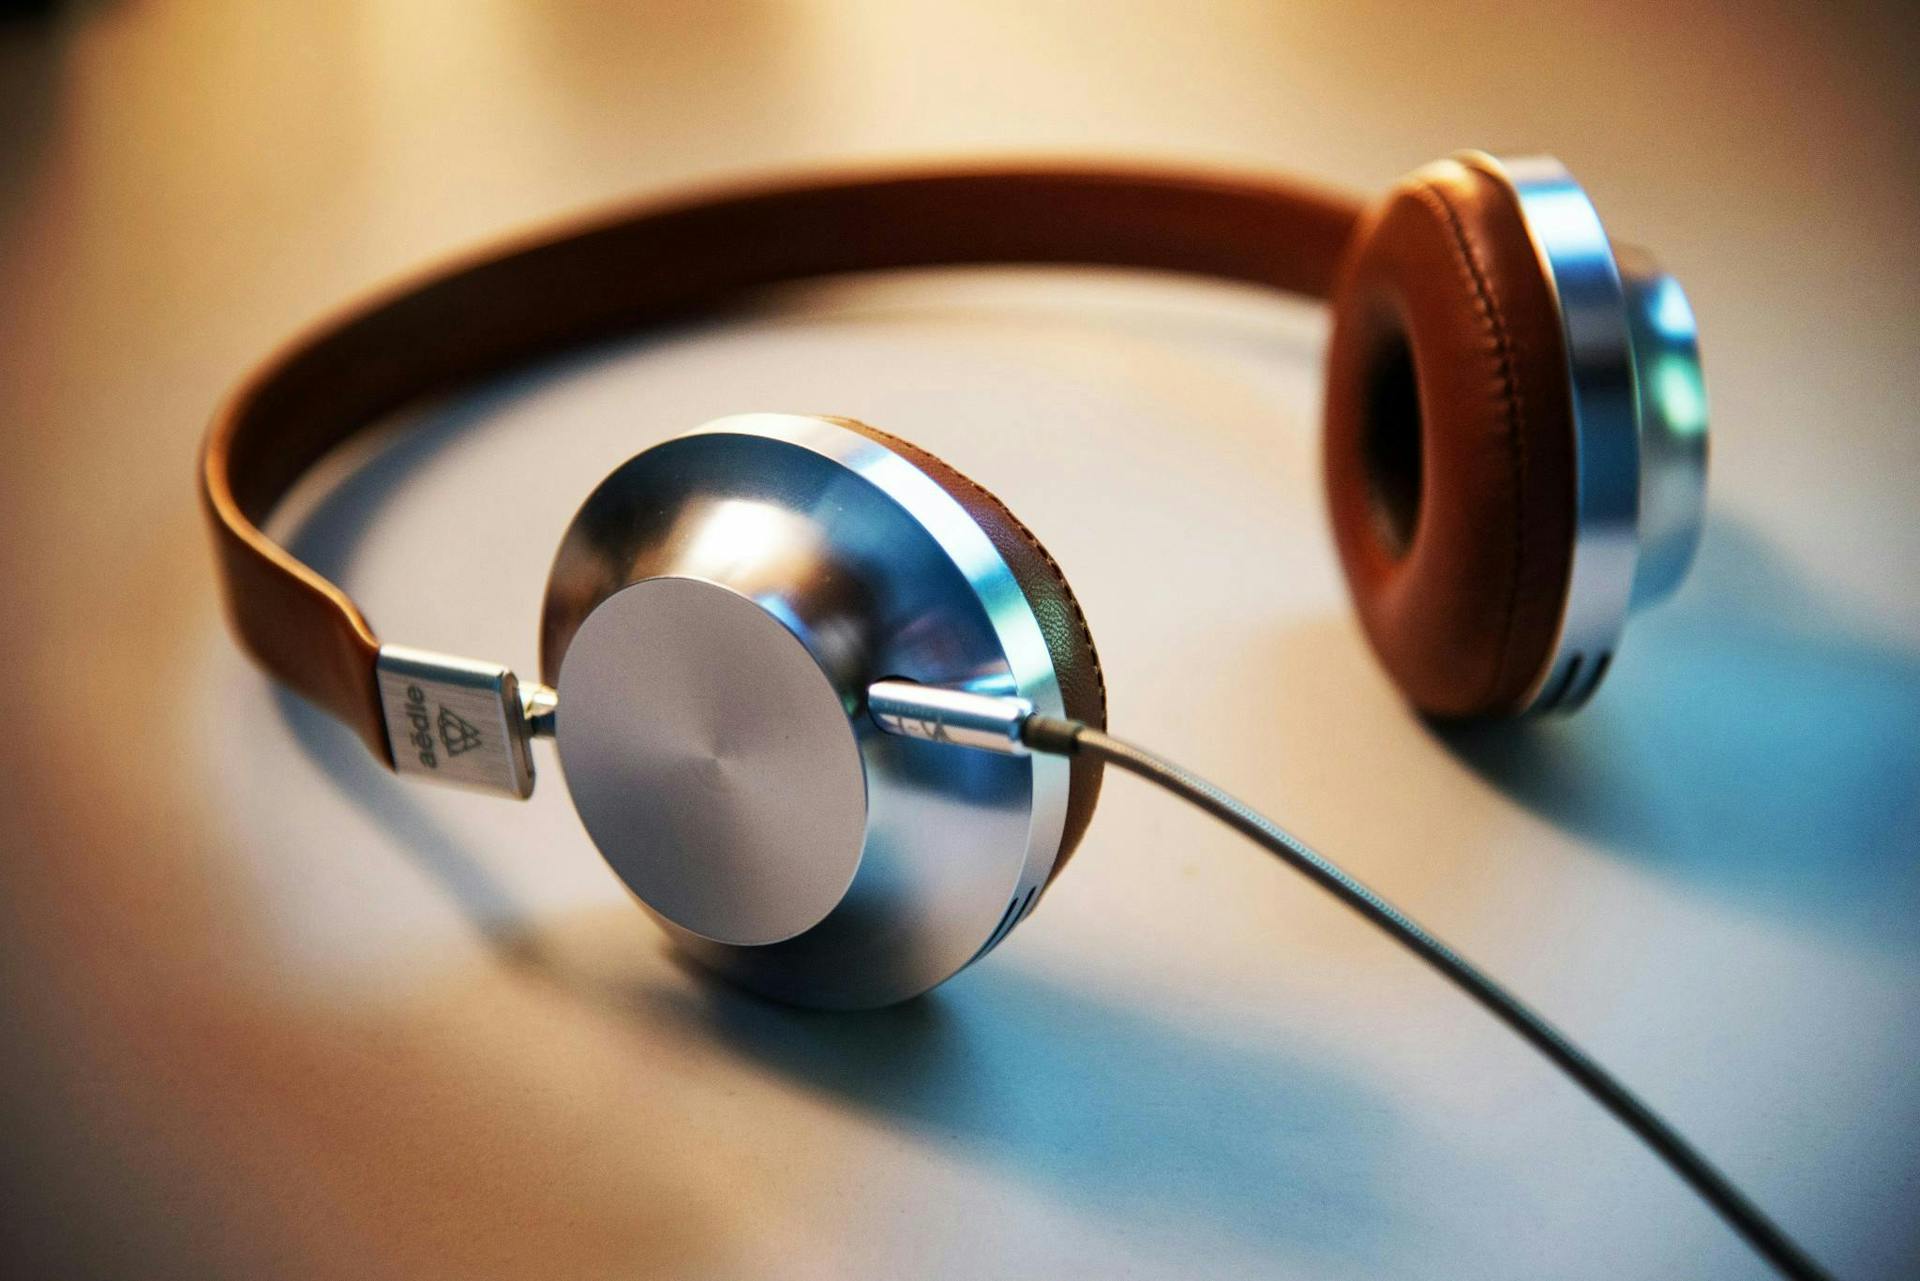 A photo of a pair of headphones on a table. This image is the visualization of social listening